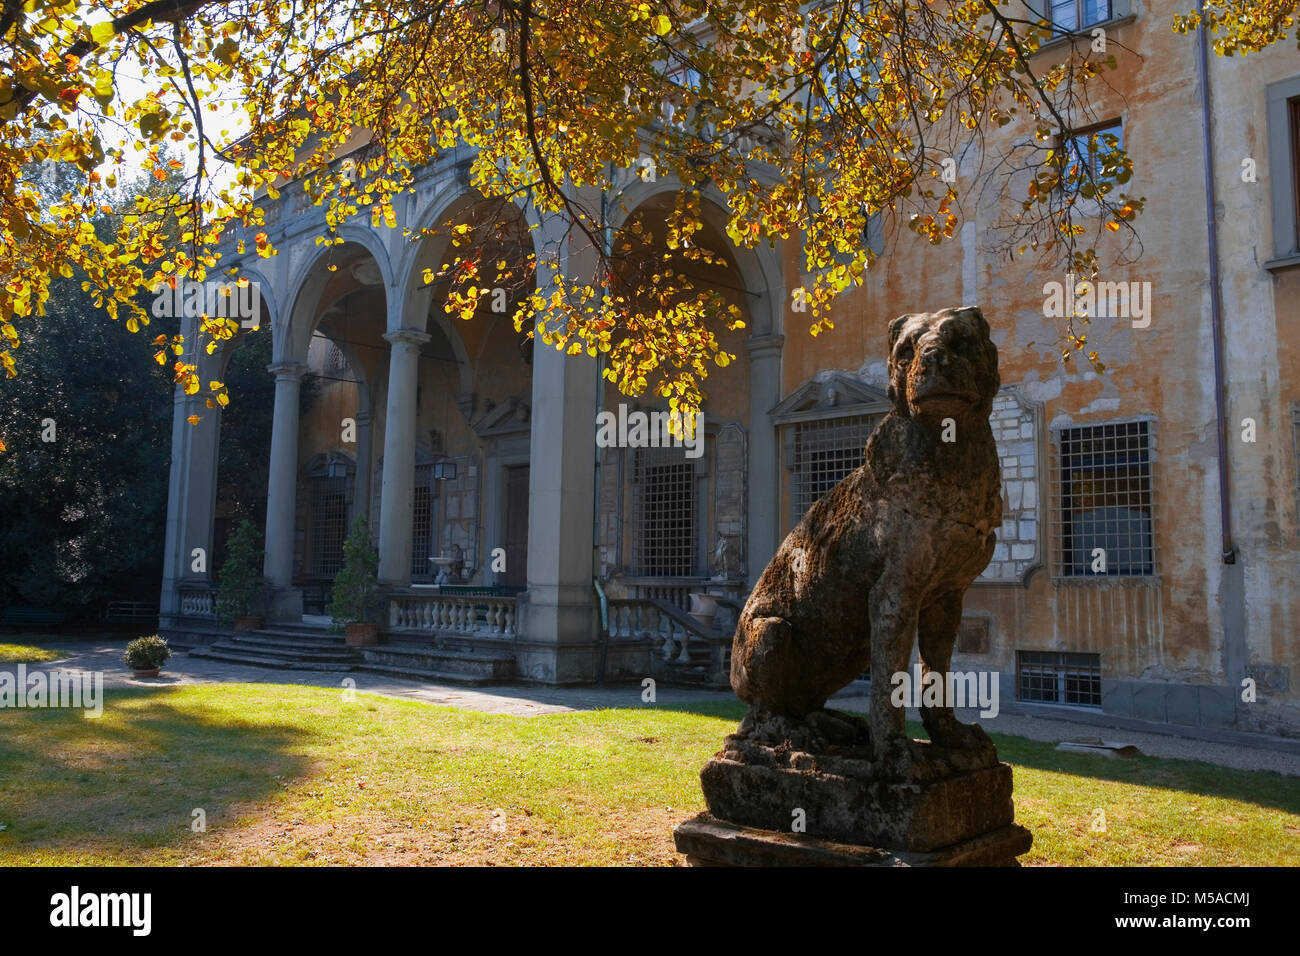 Giardino Corsini al Prato, Florence, Tuscany, Italy: view of the palace, with a quirky statue of a dog in the foreground Stock Photo